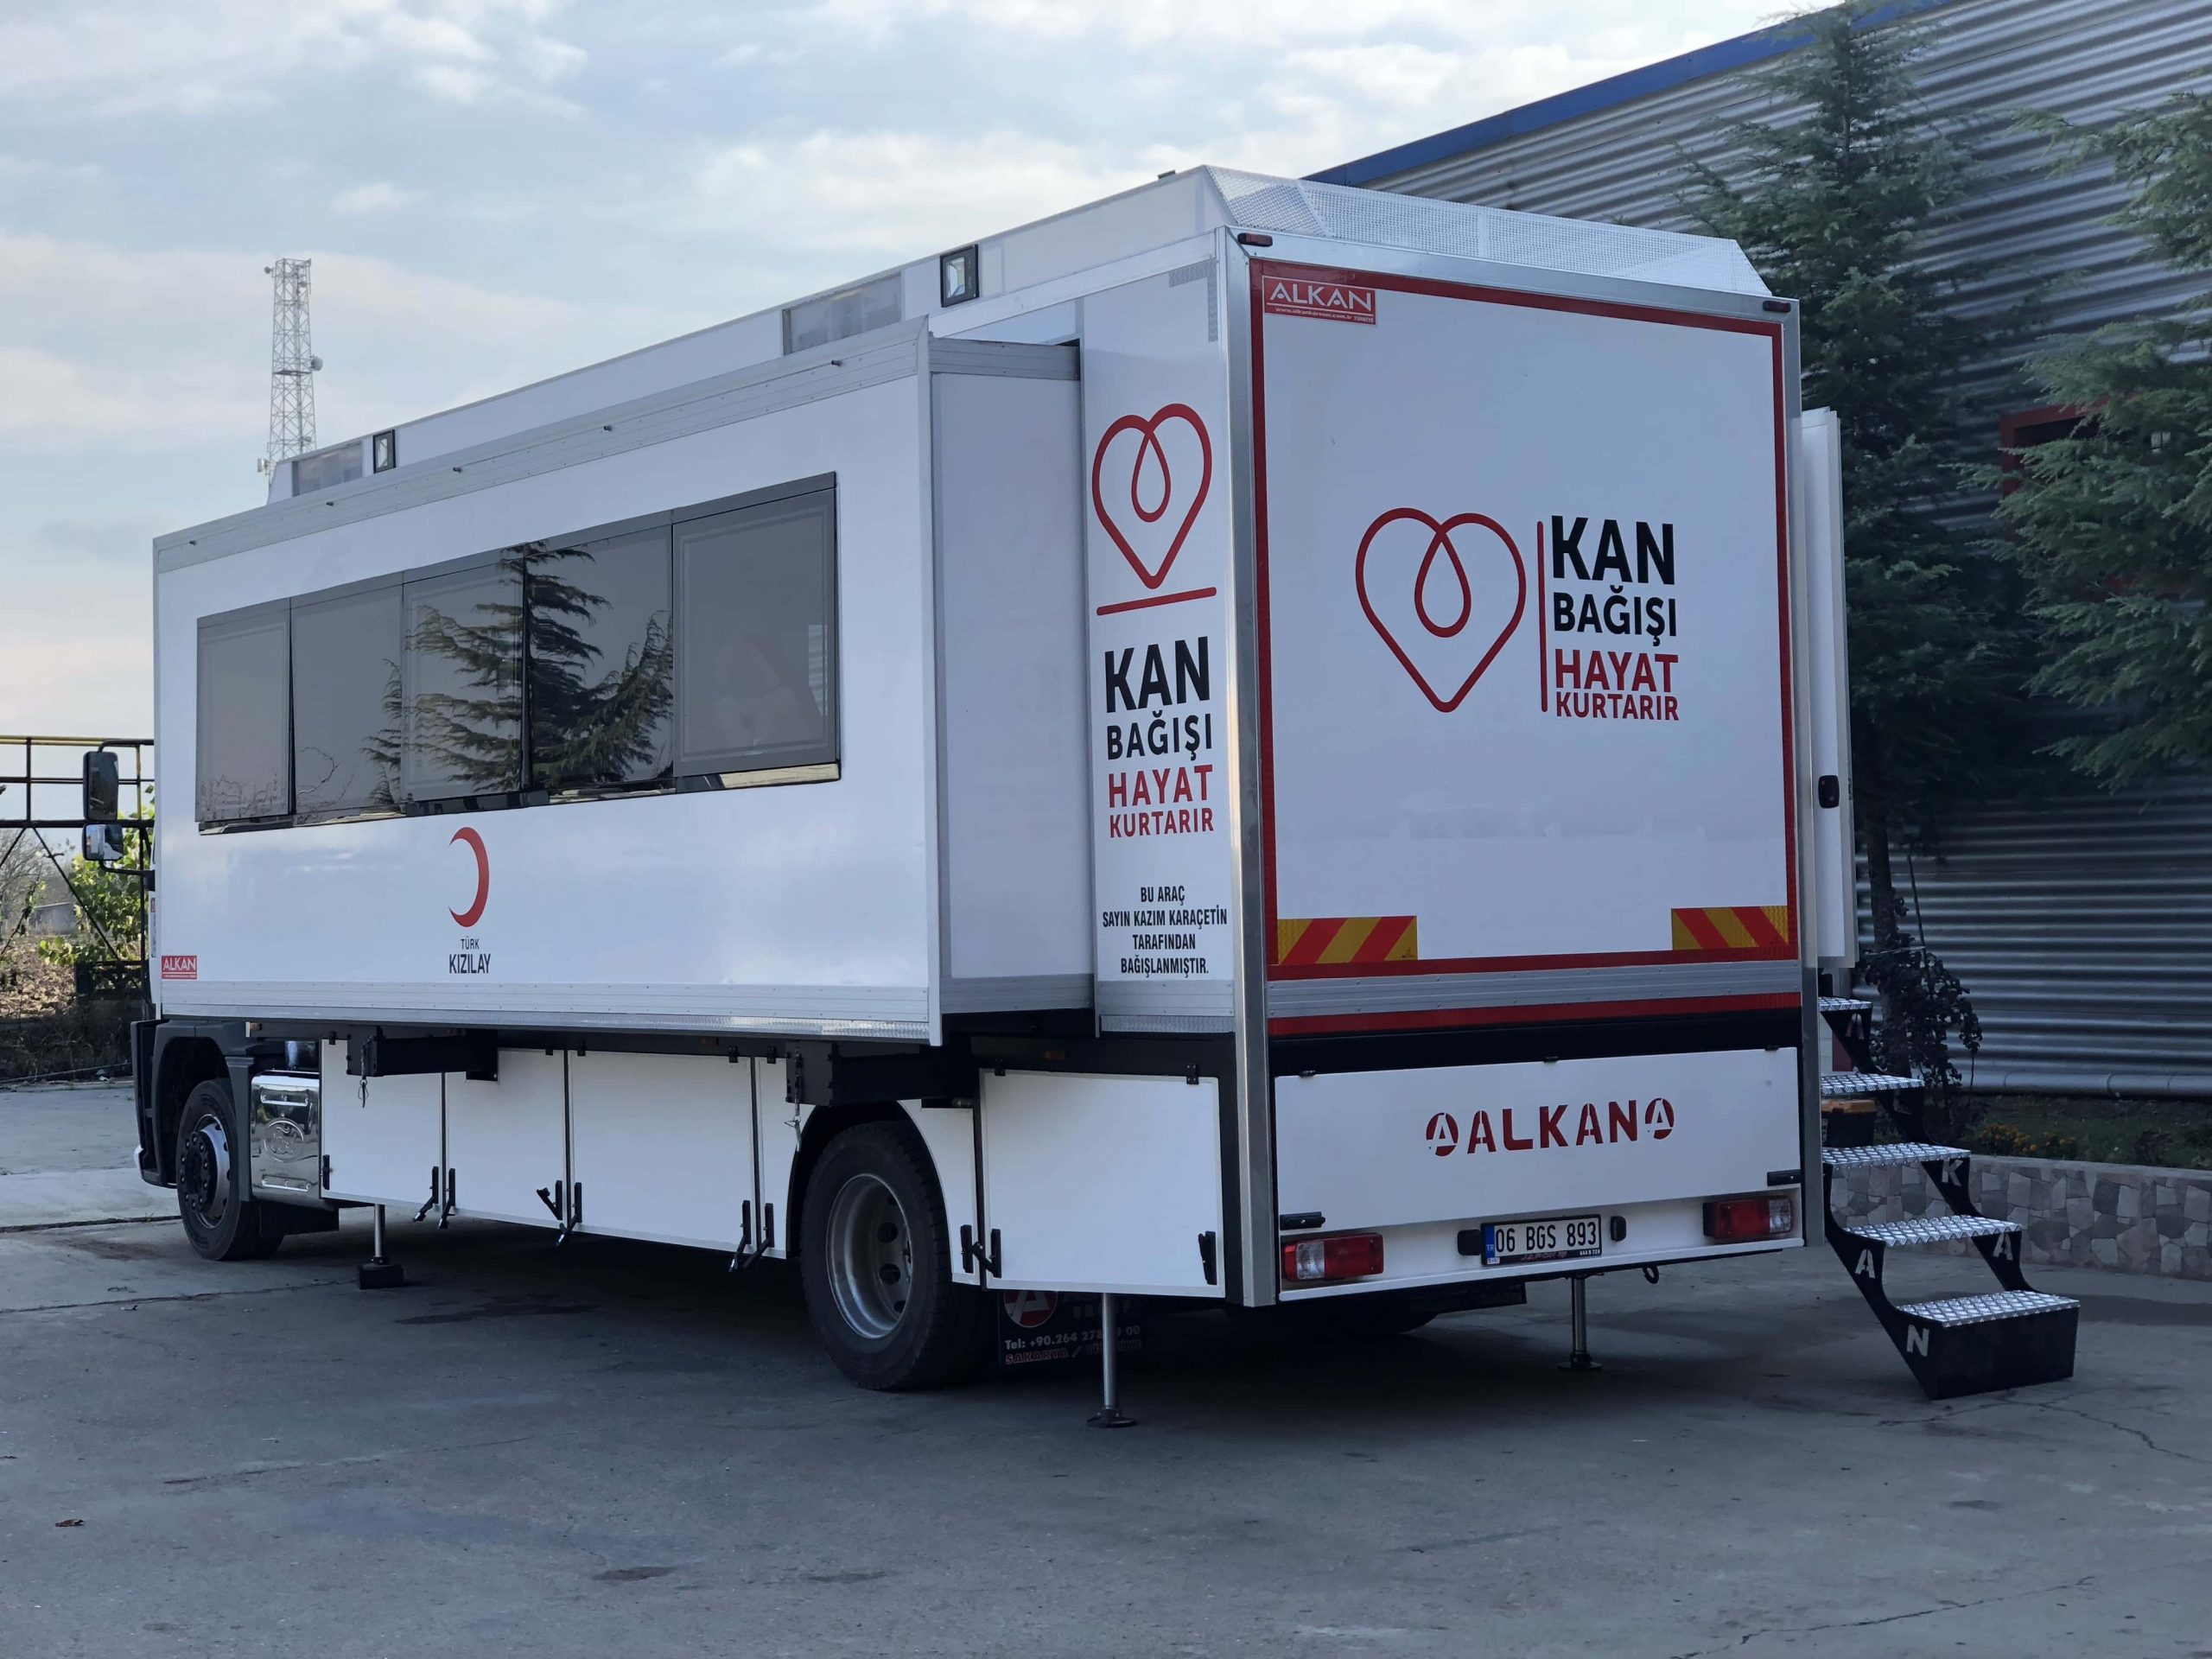 Mobile Blood Donation Truck